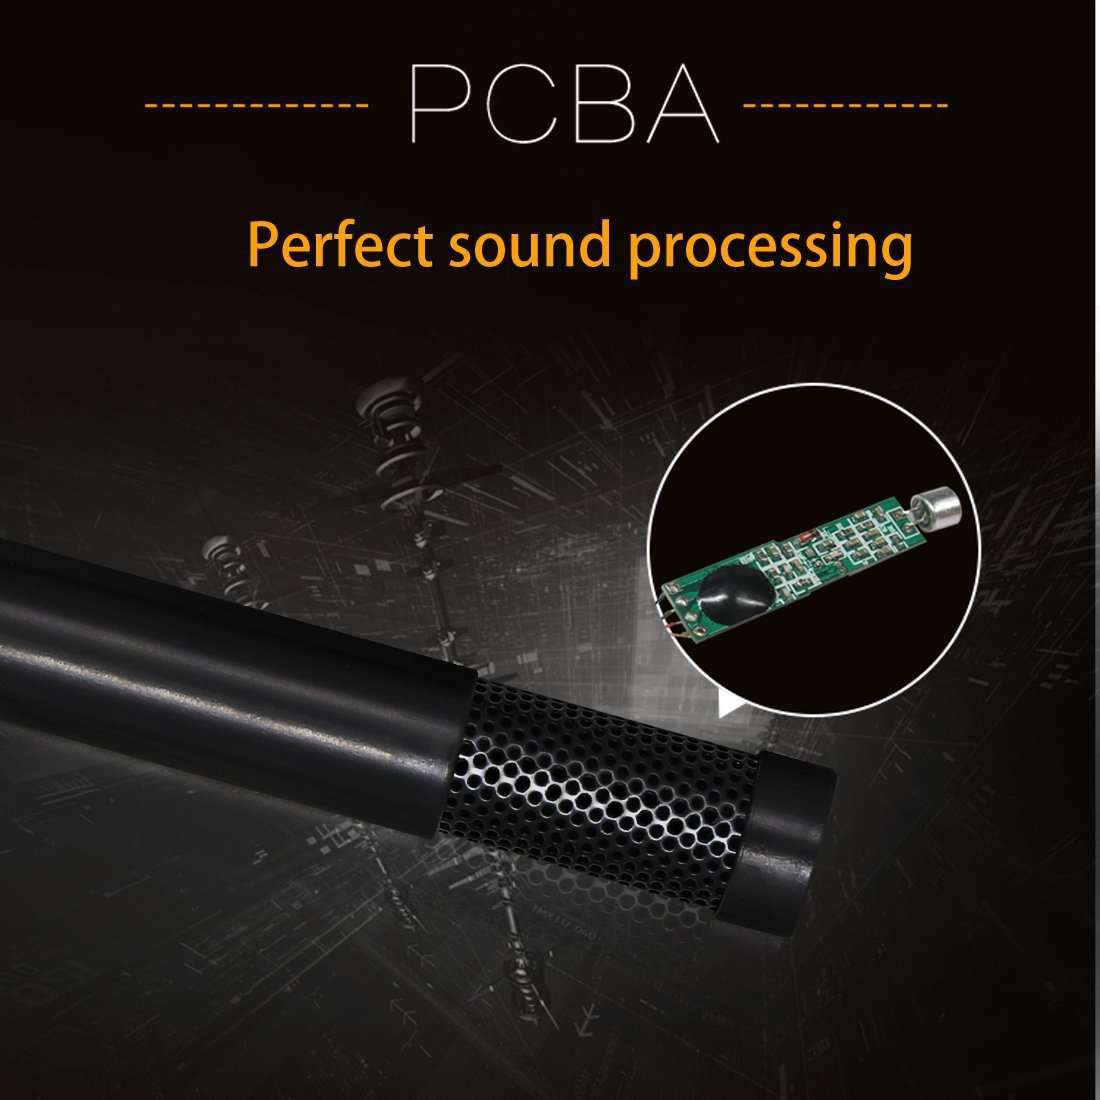 Mini Professional 3.5mm Jack Studio Stereo Condenser Recording Microphone, Cable Length: 1.5m, Compatible with PC and Mac for Live Broadcast Show, KTV, etc.